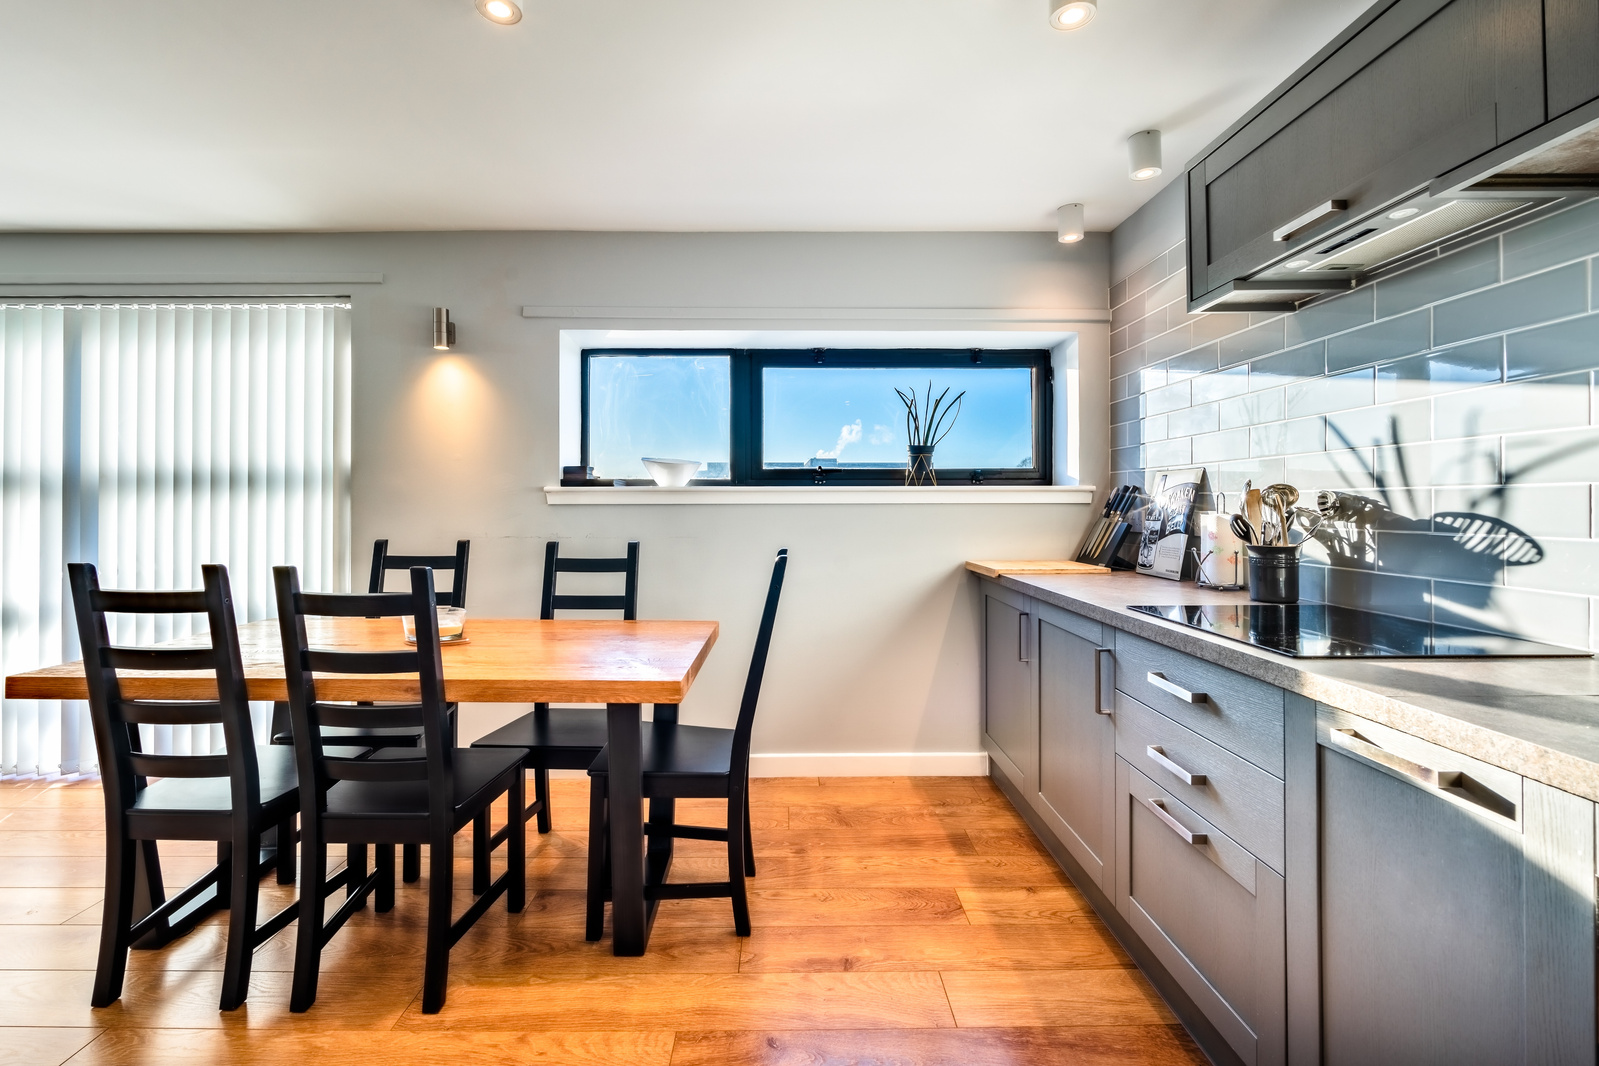 Kitchen wide angle real estate image for Scotland Interior HDR Property - Photography by Nate Cleary